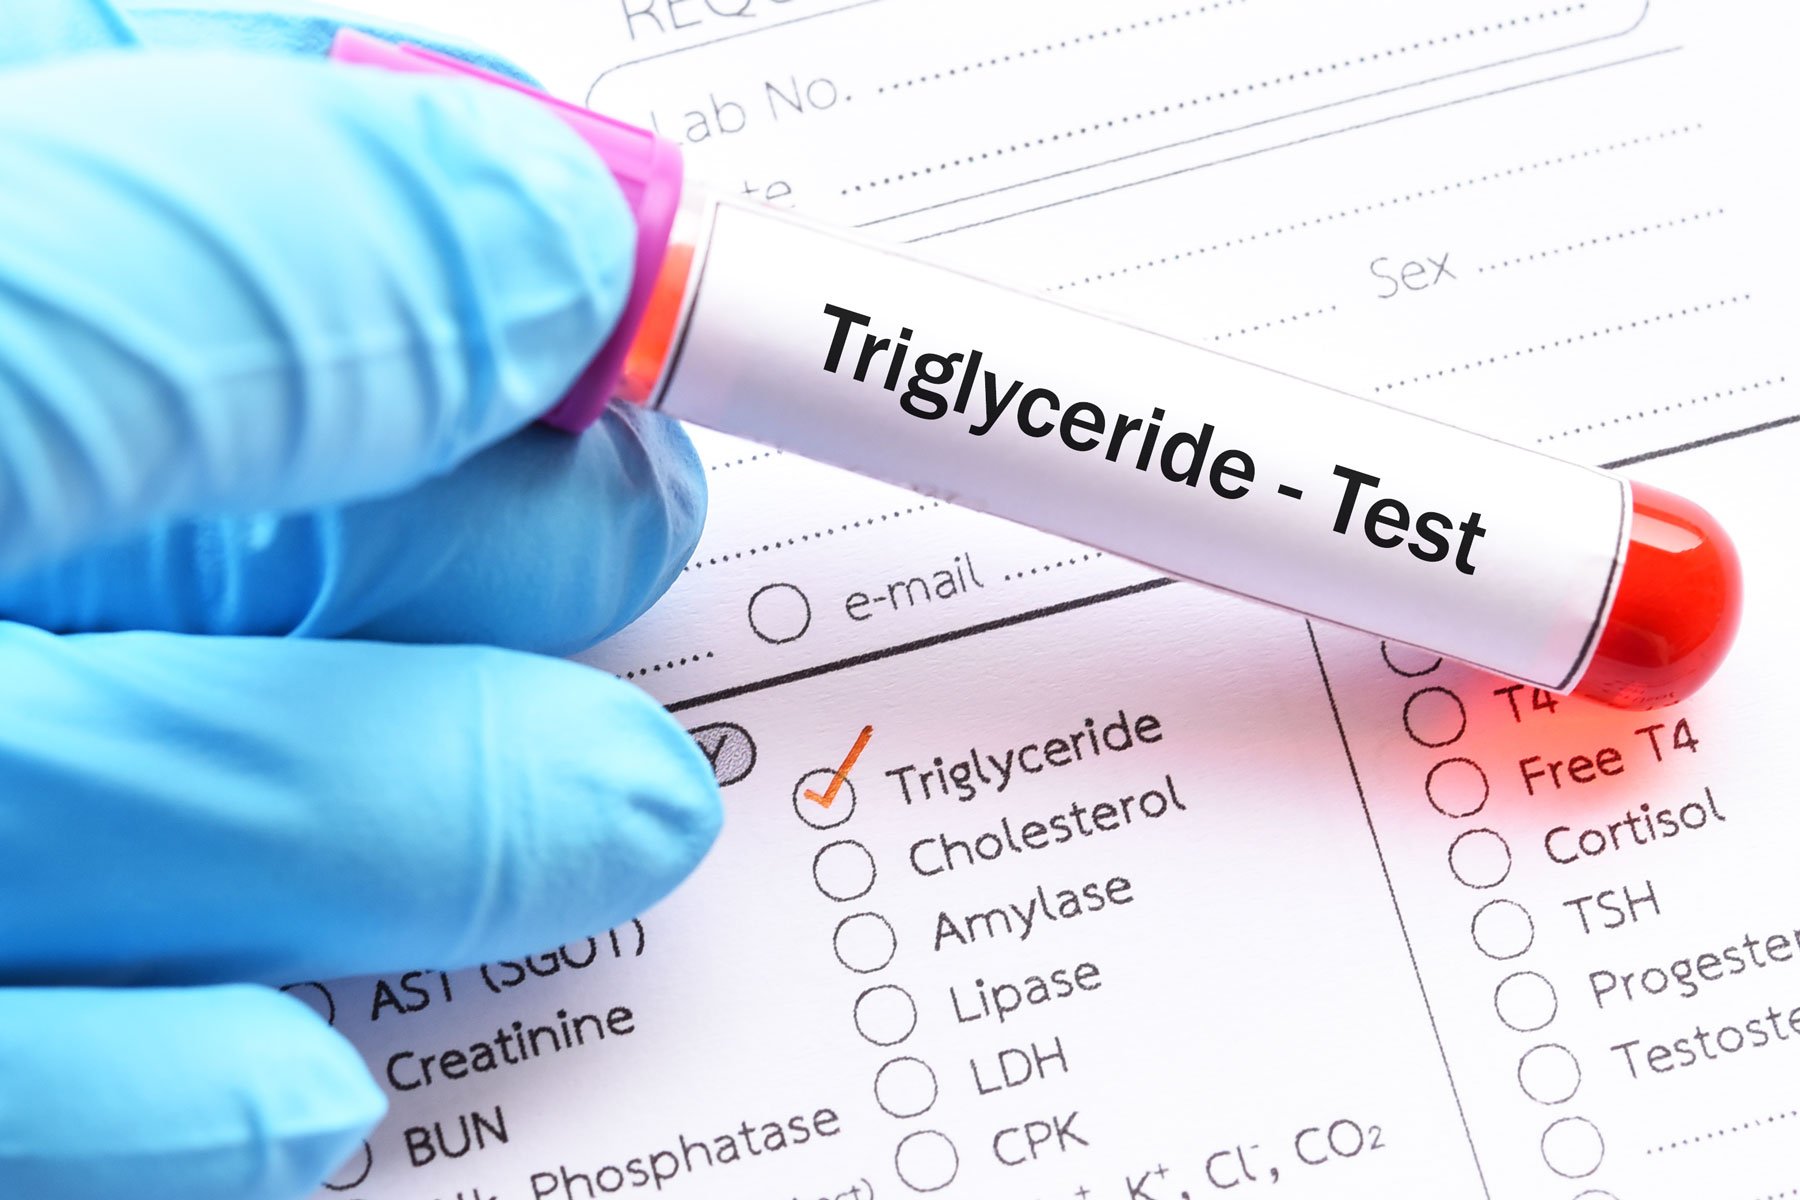 Why are triglycerides so important to metabolic health?